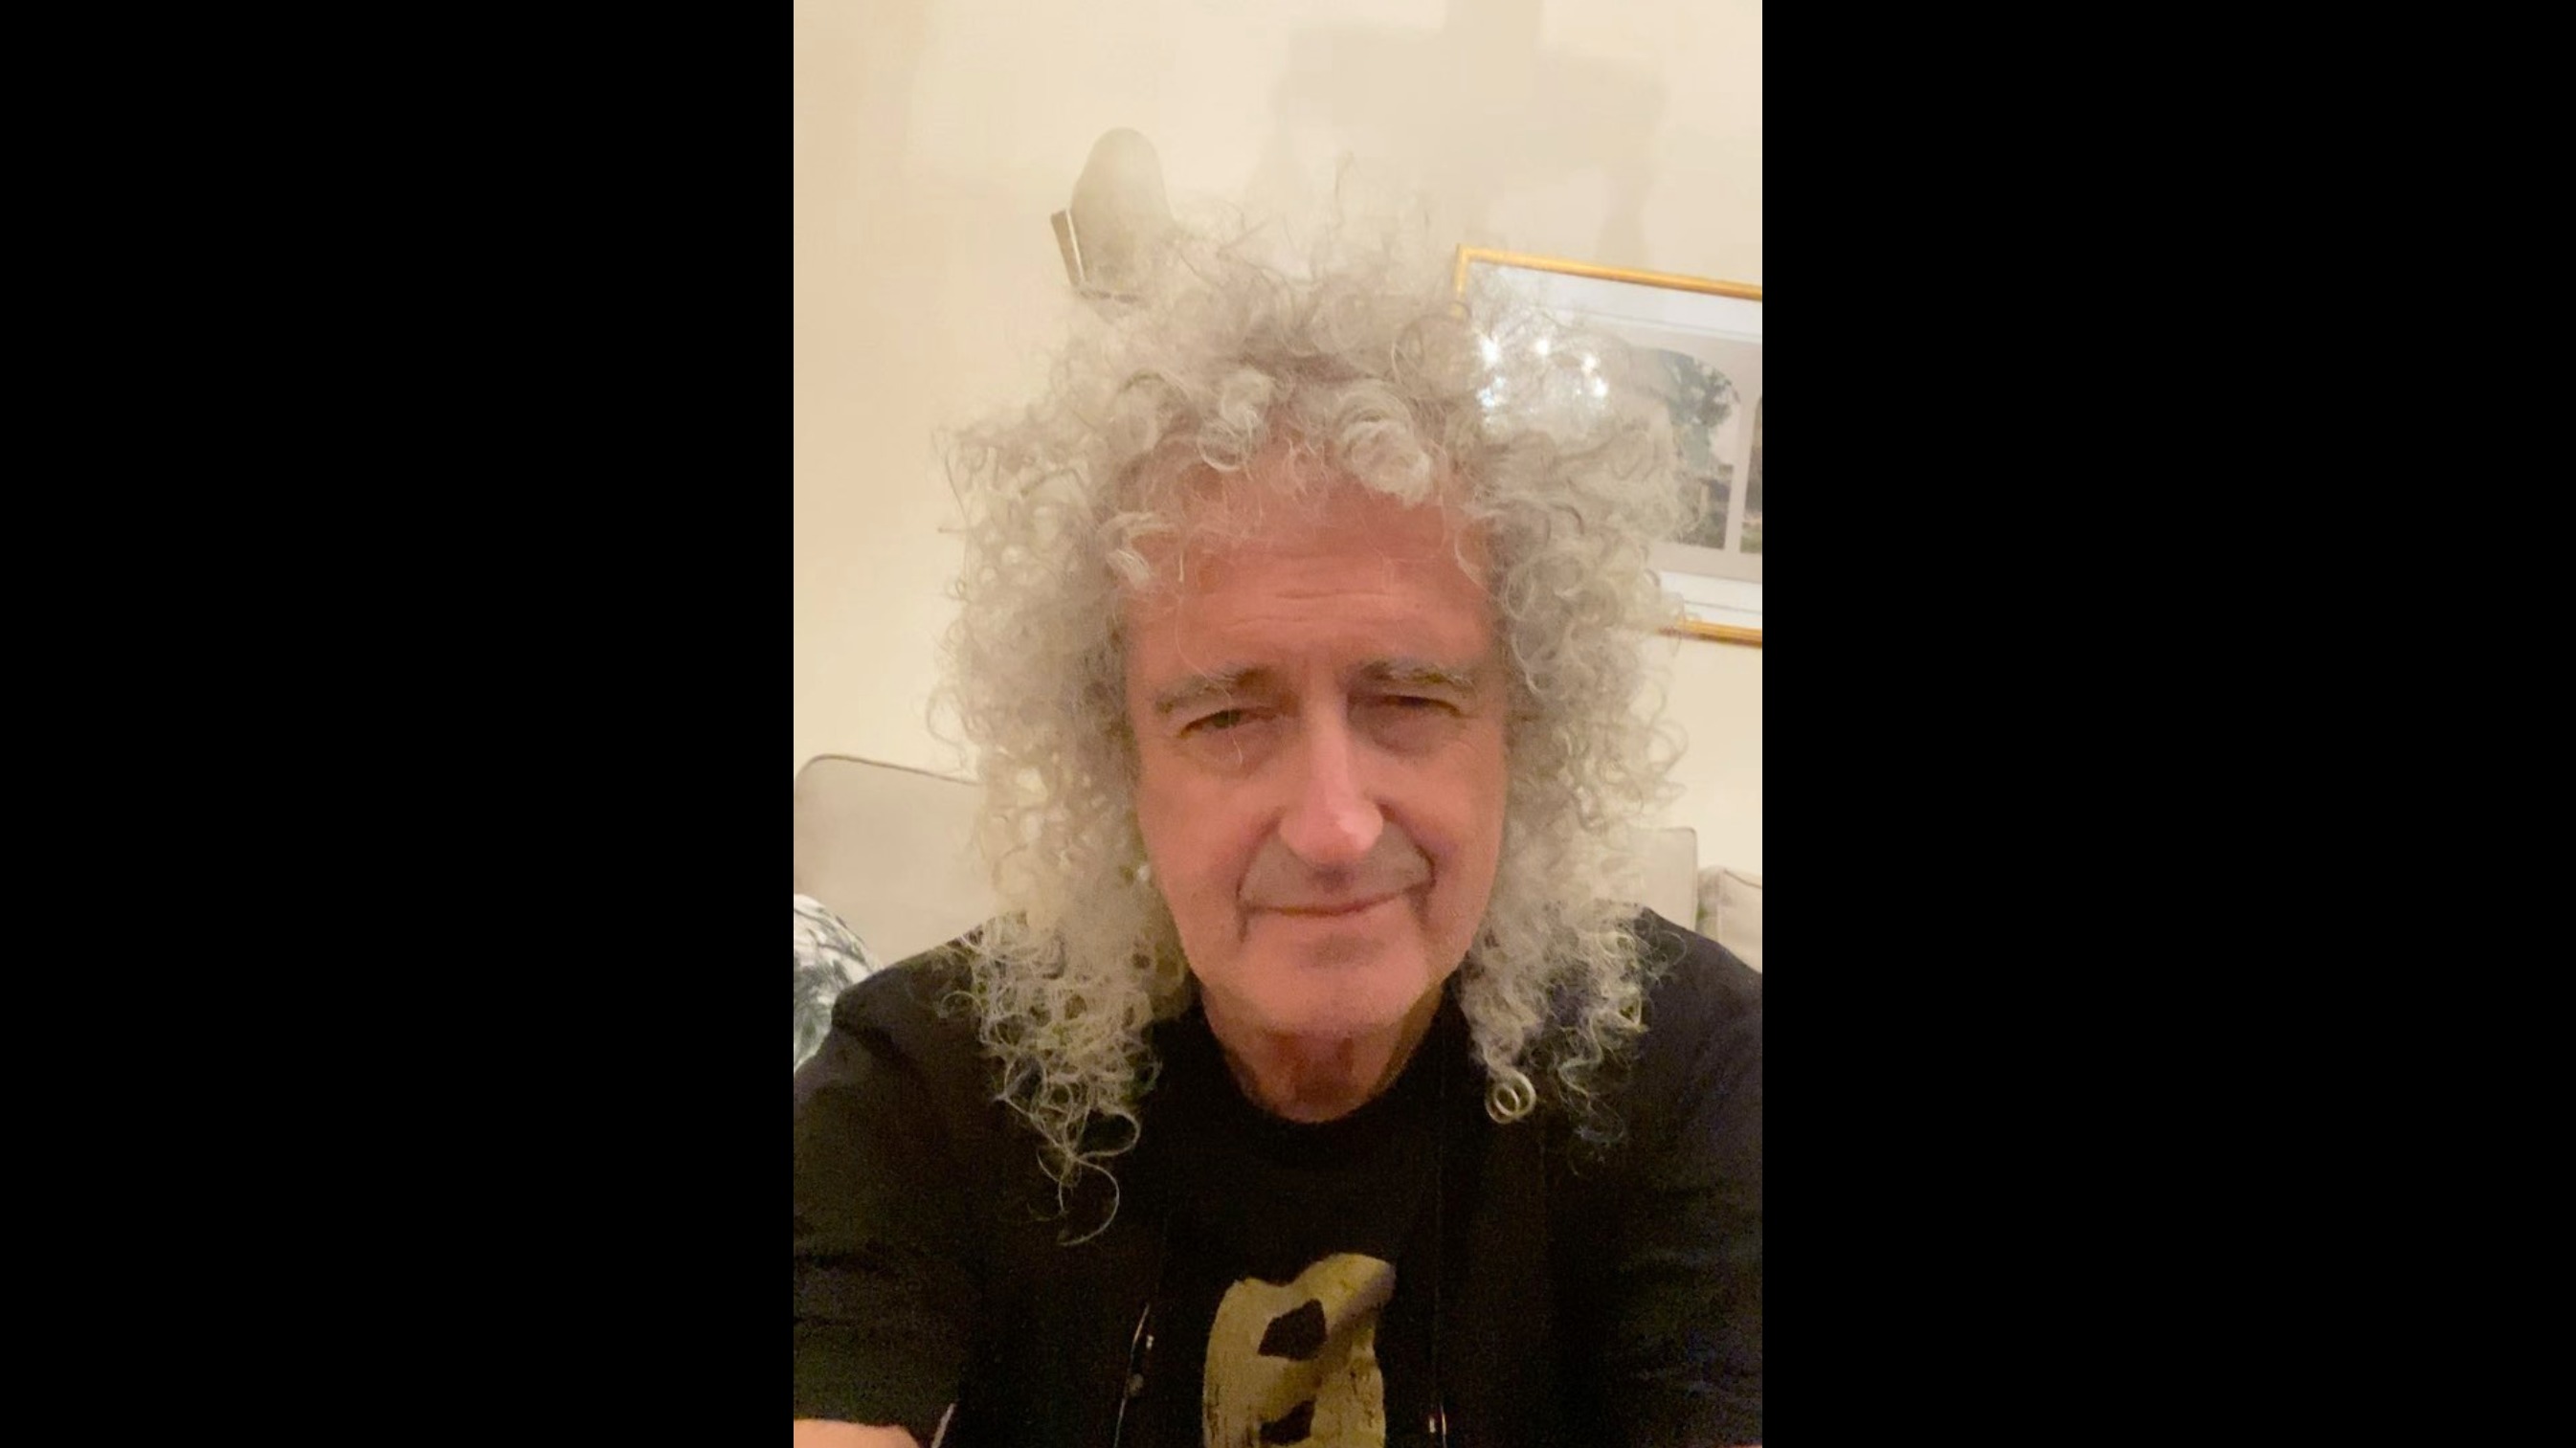 Brian May Touched By The Torrent Of Love And Support From Fans After Heart Attack